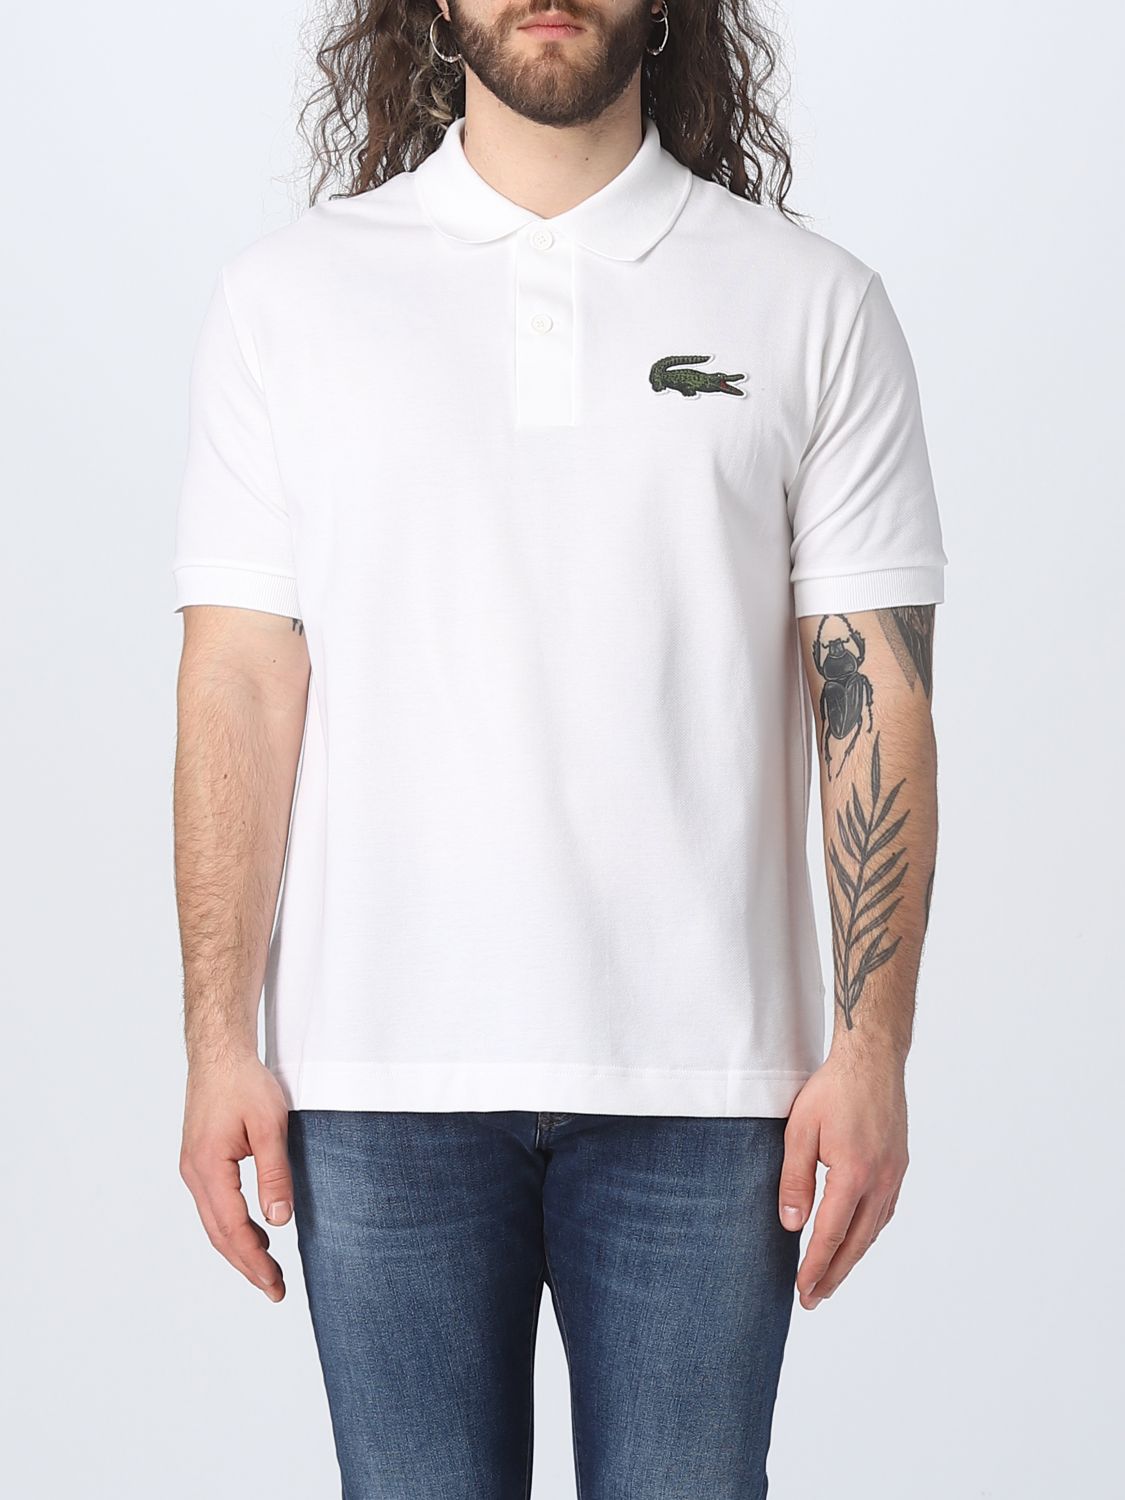 vrijdag gerucht Ophef LACOSTE: polo shirt for man - White | Lacoste polo shirt PH3922 online on  GIGLIO.COM